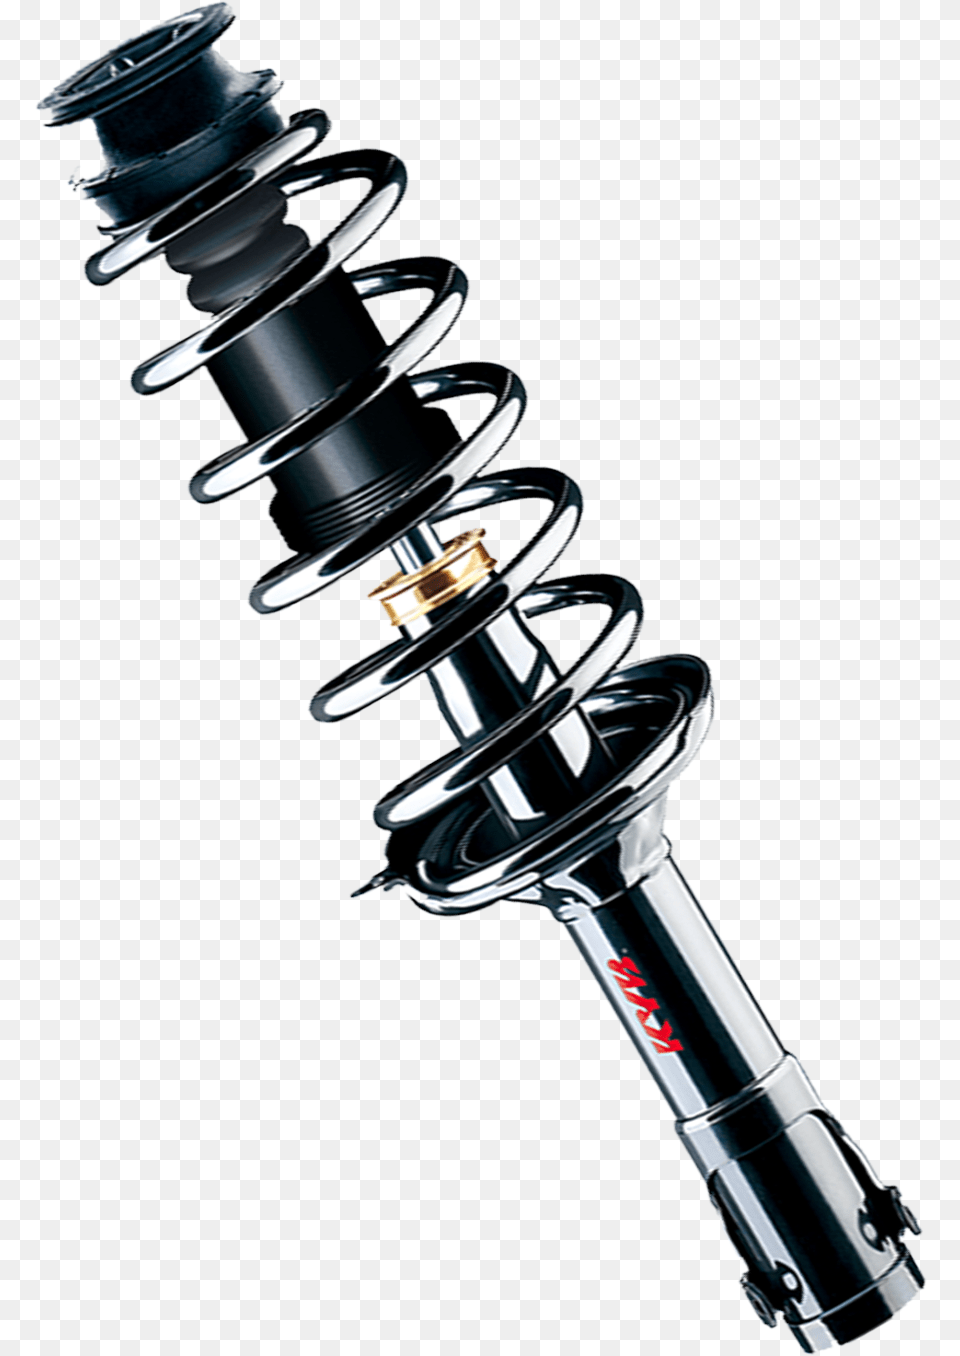 Shock Absorbers Series Shock Absorber Kayaba Brand, Machine, Suspension, Coil, Spiral Png Image